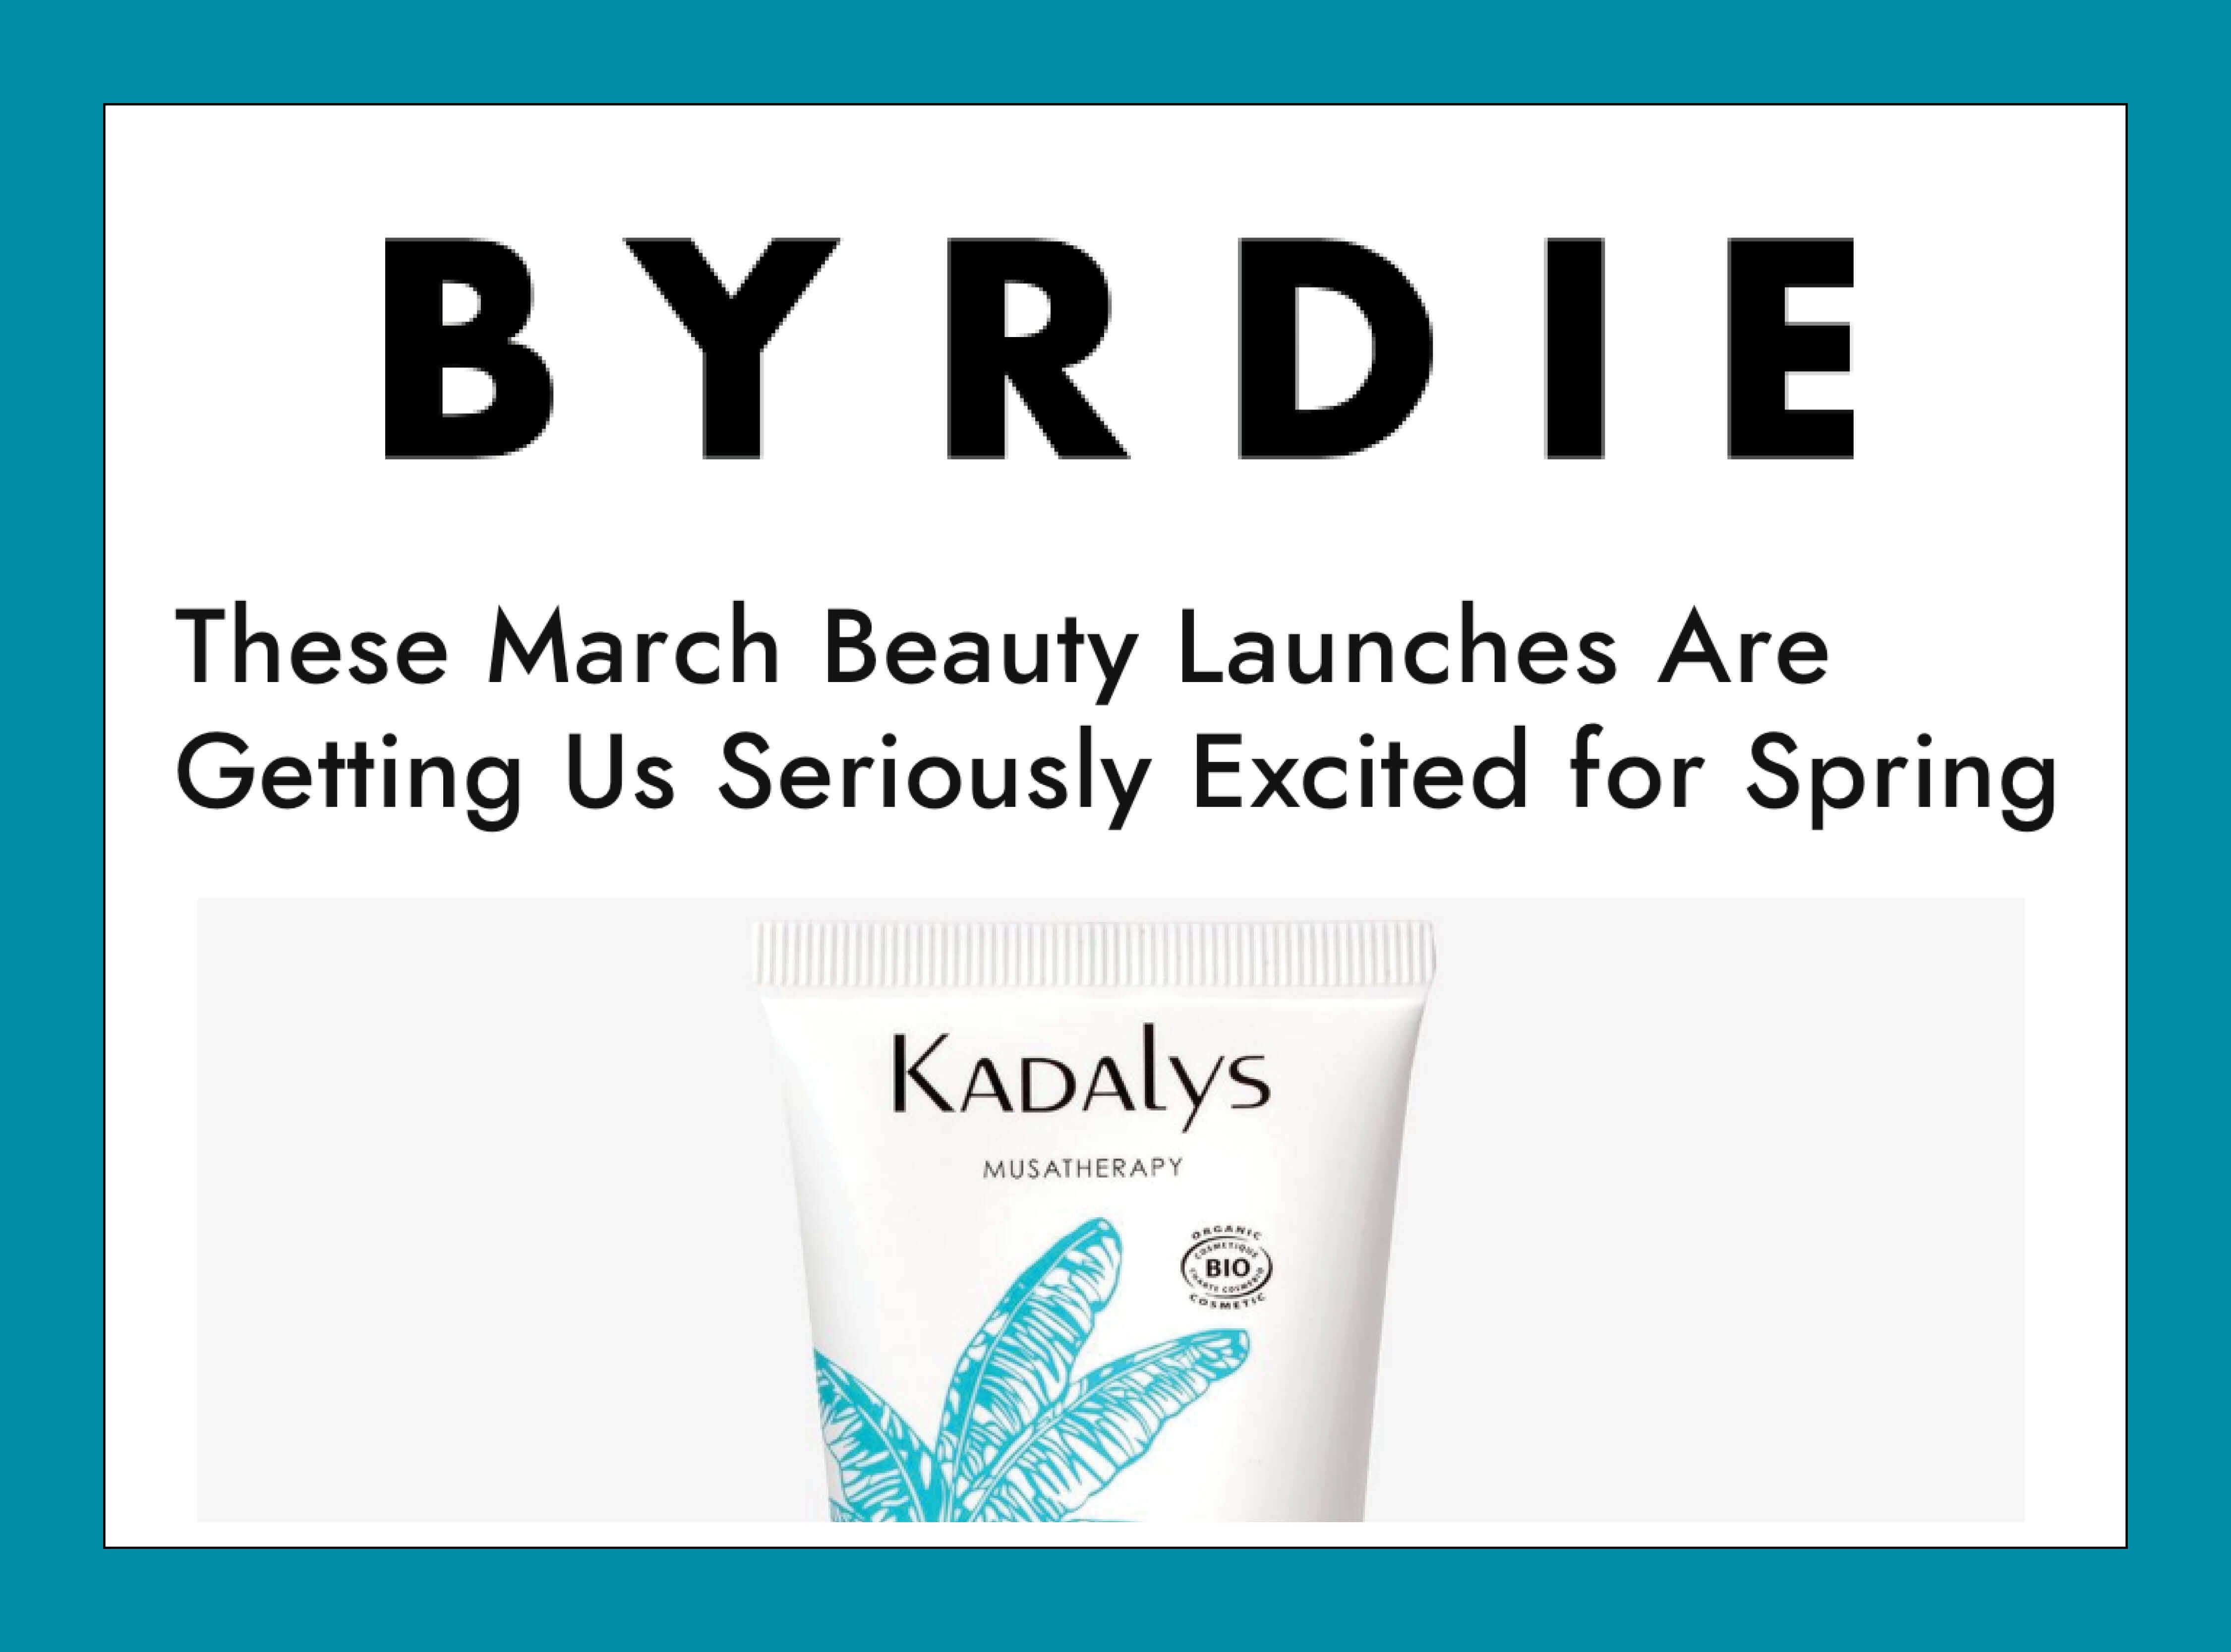 Byrdie features the Kadalys Peeling Exfoliant as a must-try product for Spring.